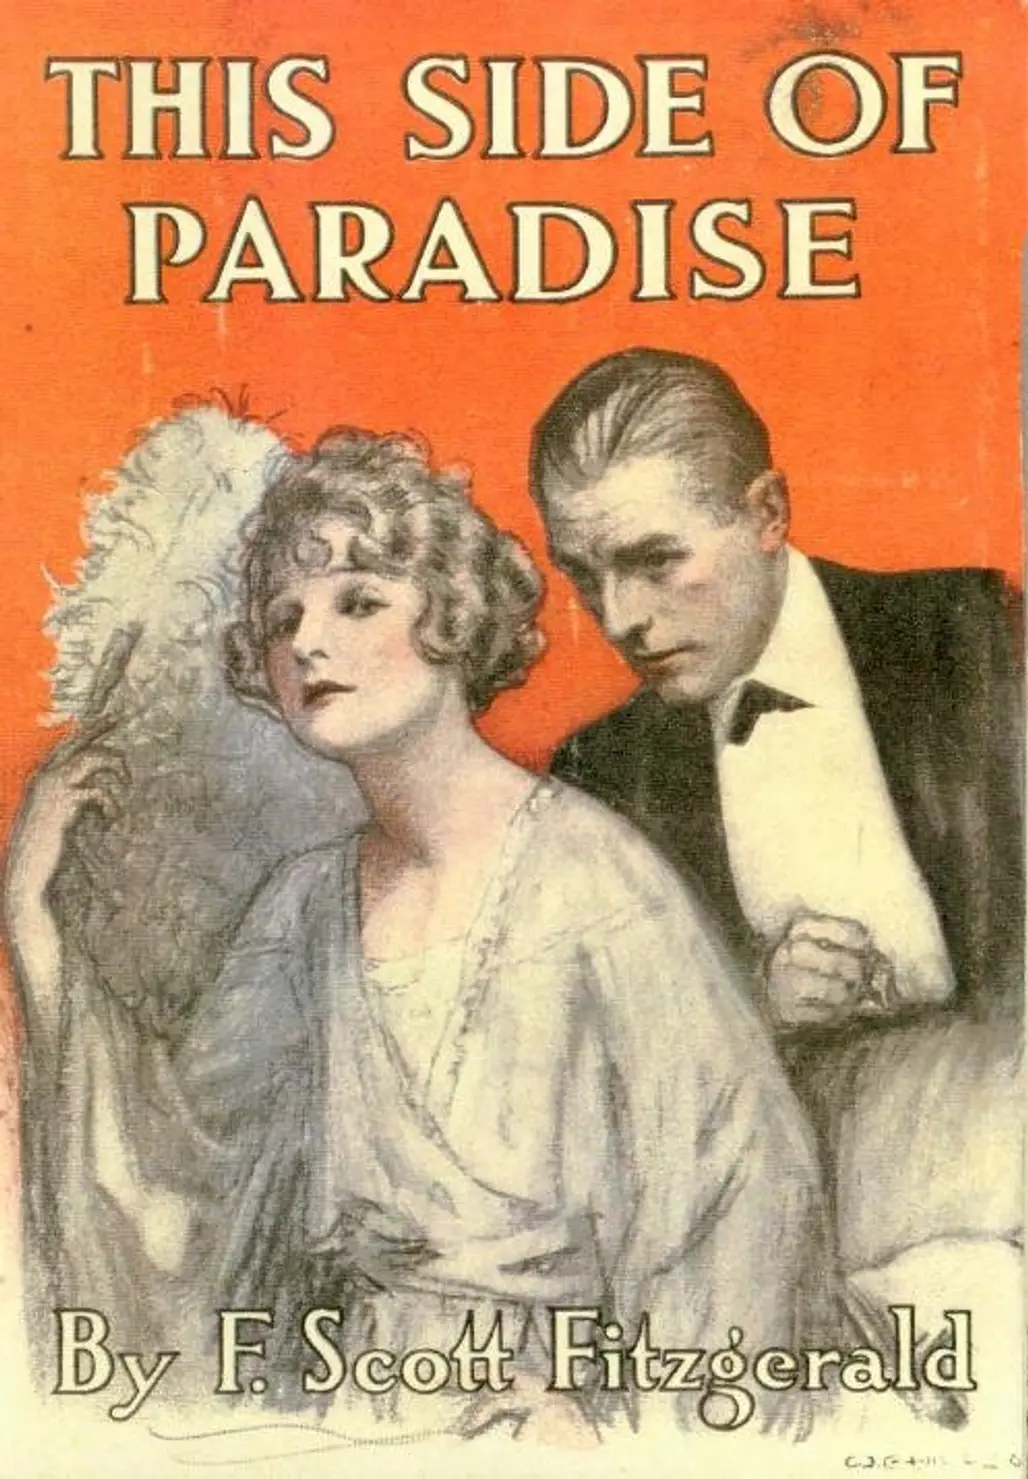 This Side of Paradise – F. Scott Fitzgerald